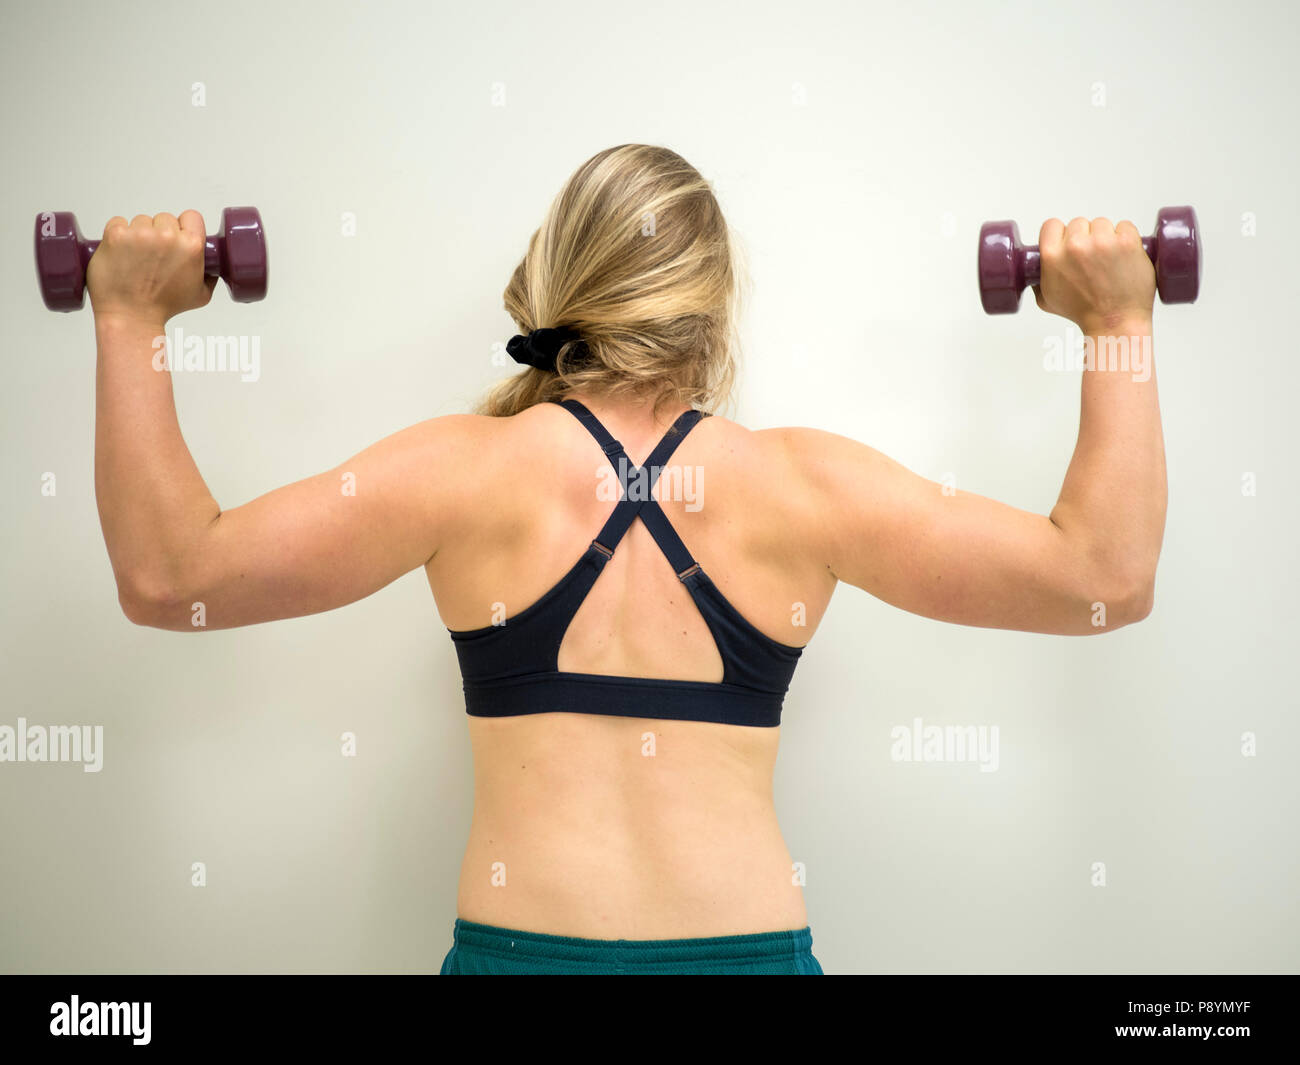 1,220 Woman Doing Bicep Curls Images, Stock Photos, 3D objects, & Vectors